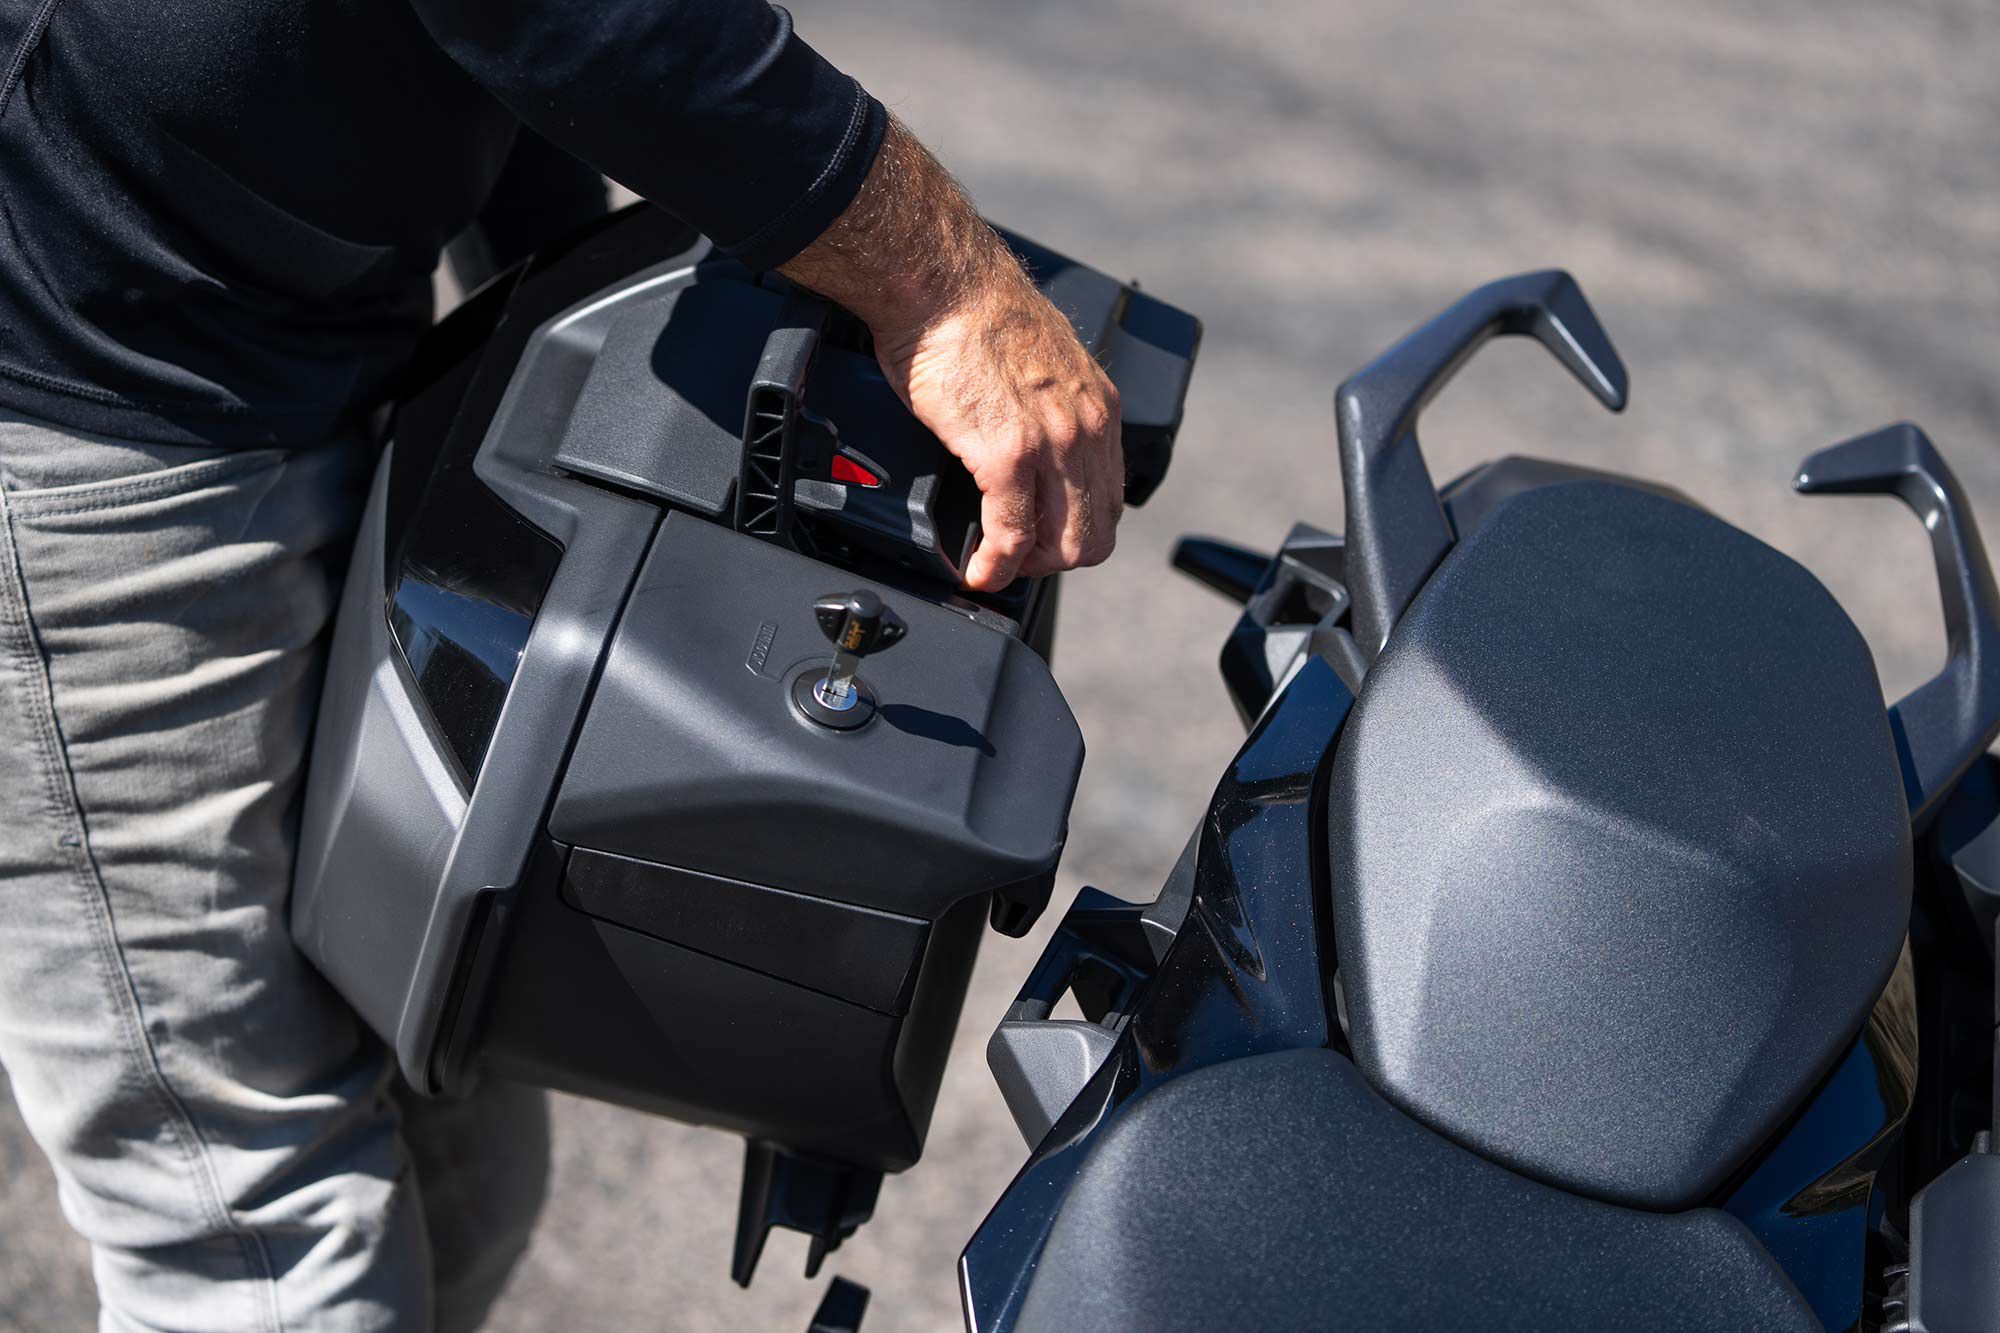 The hard case luggage comes standard on the GSX-S1000GT+ model. The lockable cases are easy to install and remove from the motorcycle.